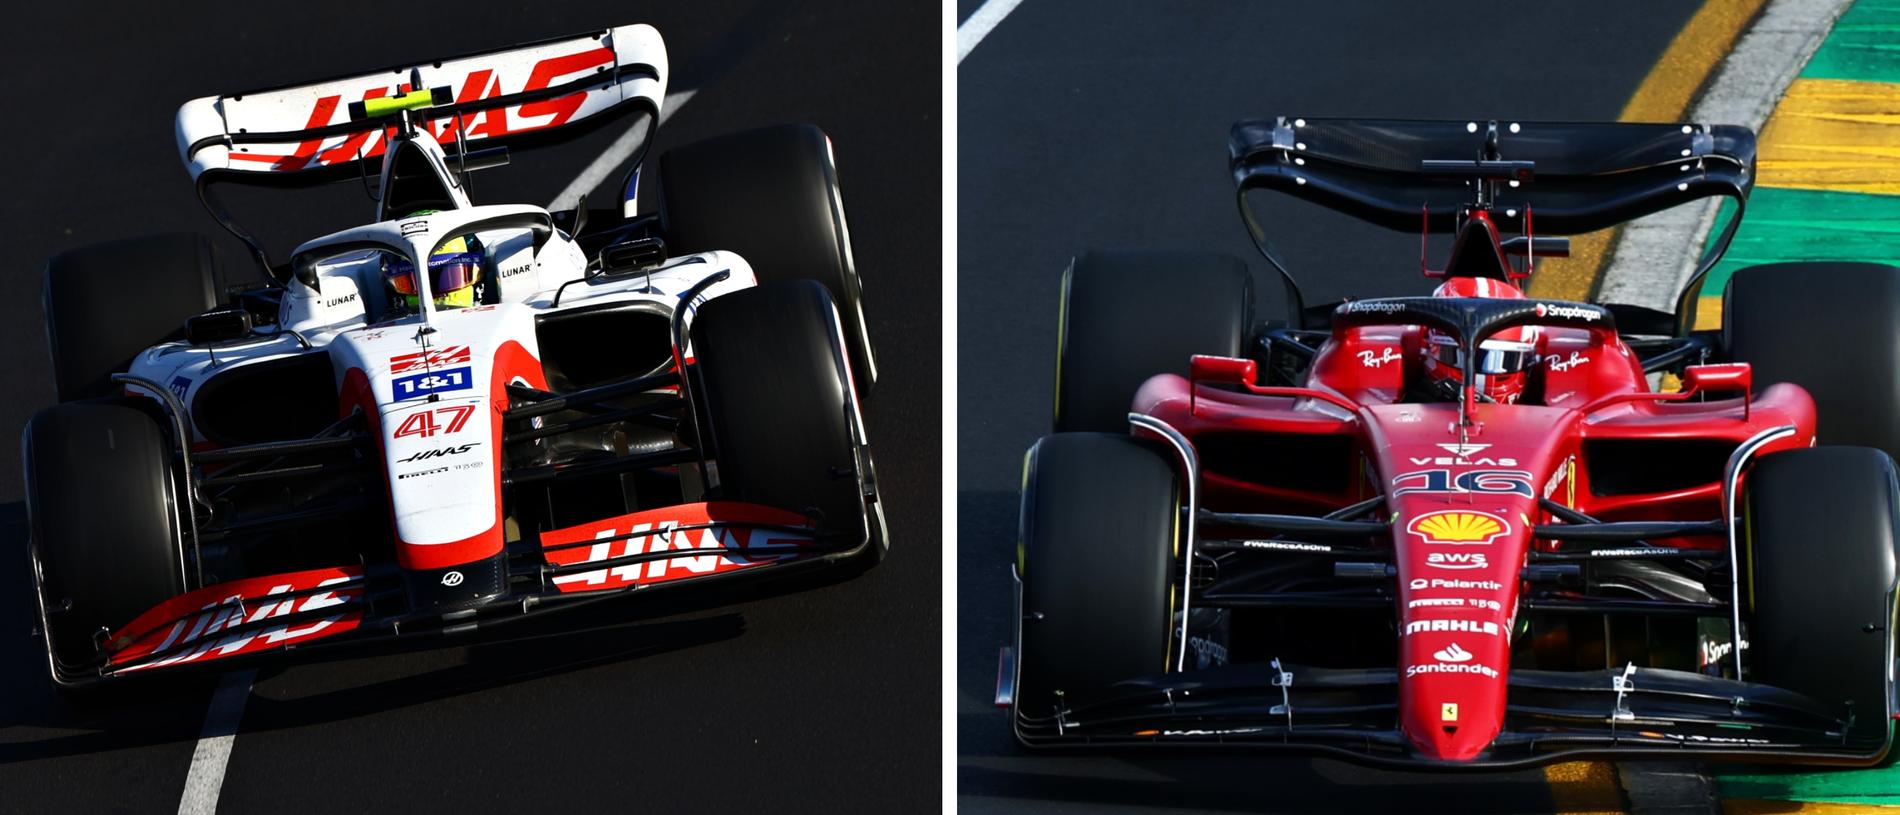 F1 news 2022: FIA investigation of Haas, claims of copying Ferrari,  relationship, which teams involved, VF-22, F1-75